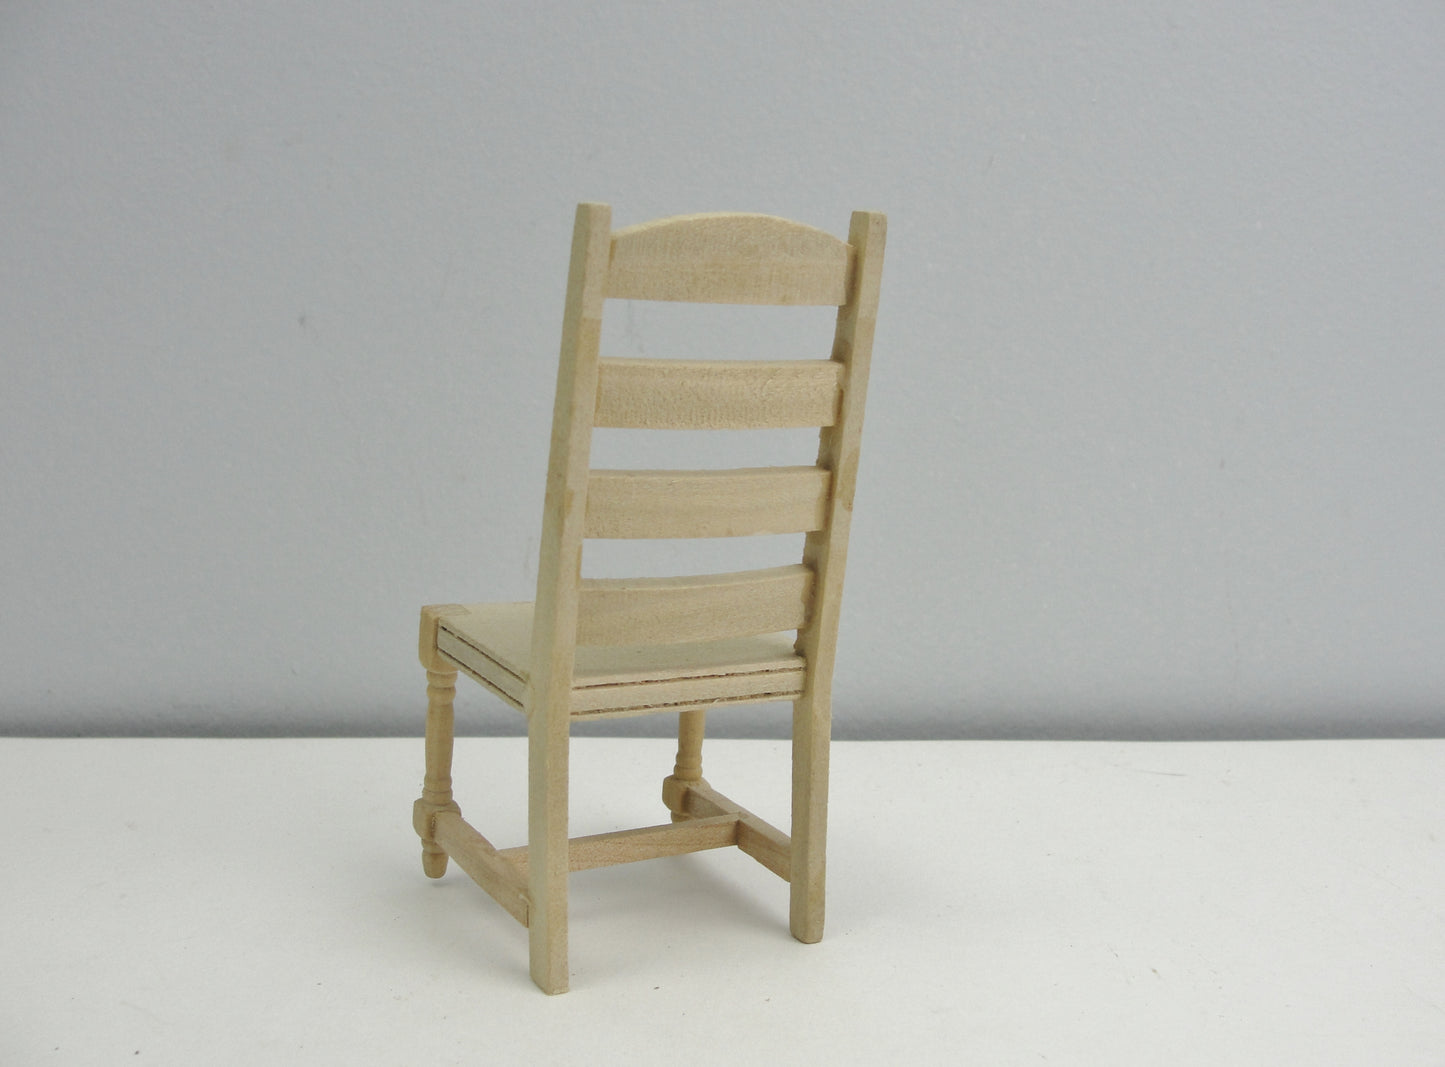 Dollhouse furniture ladder back dining chair